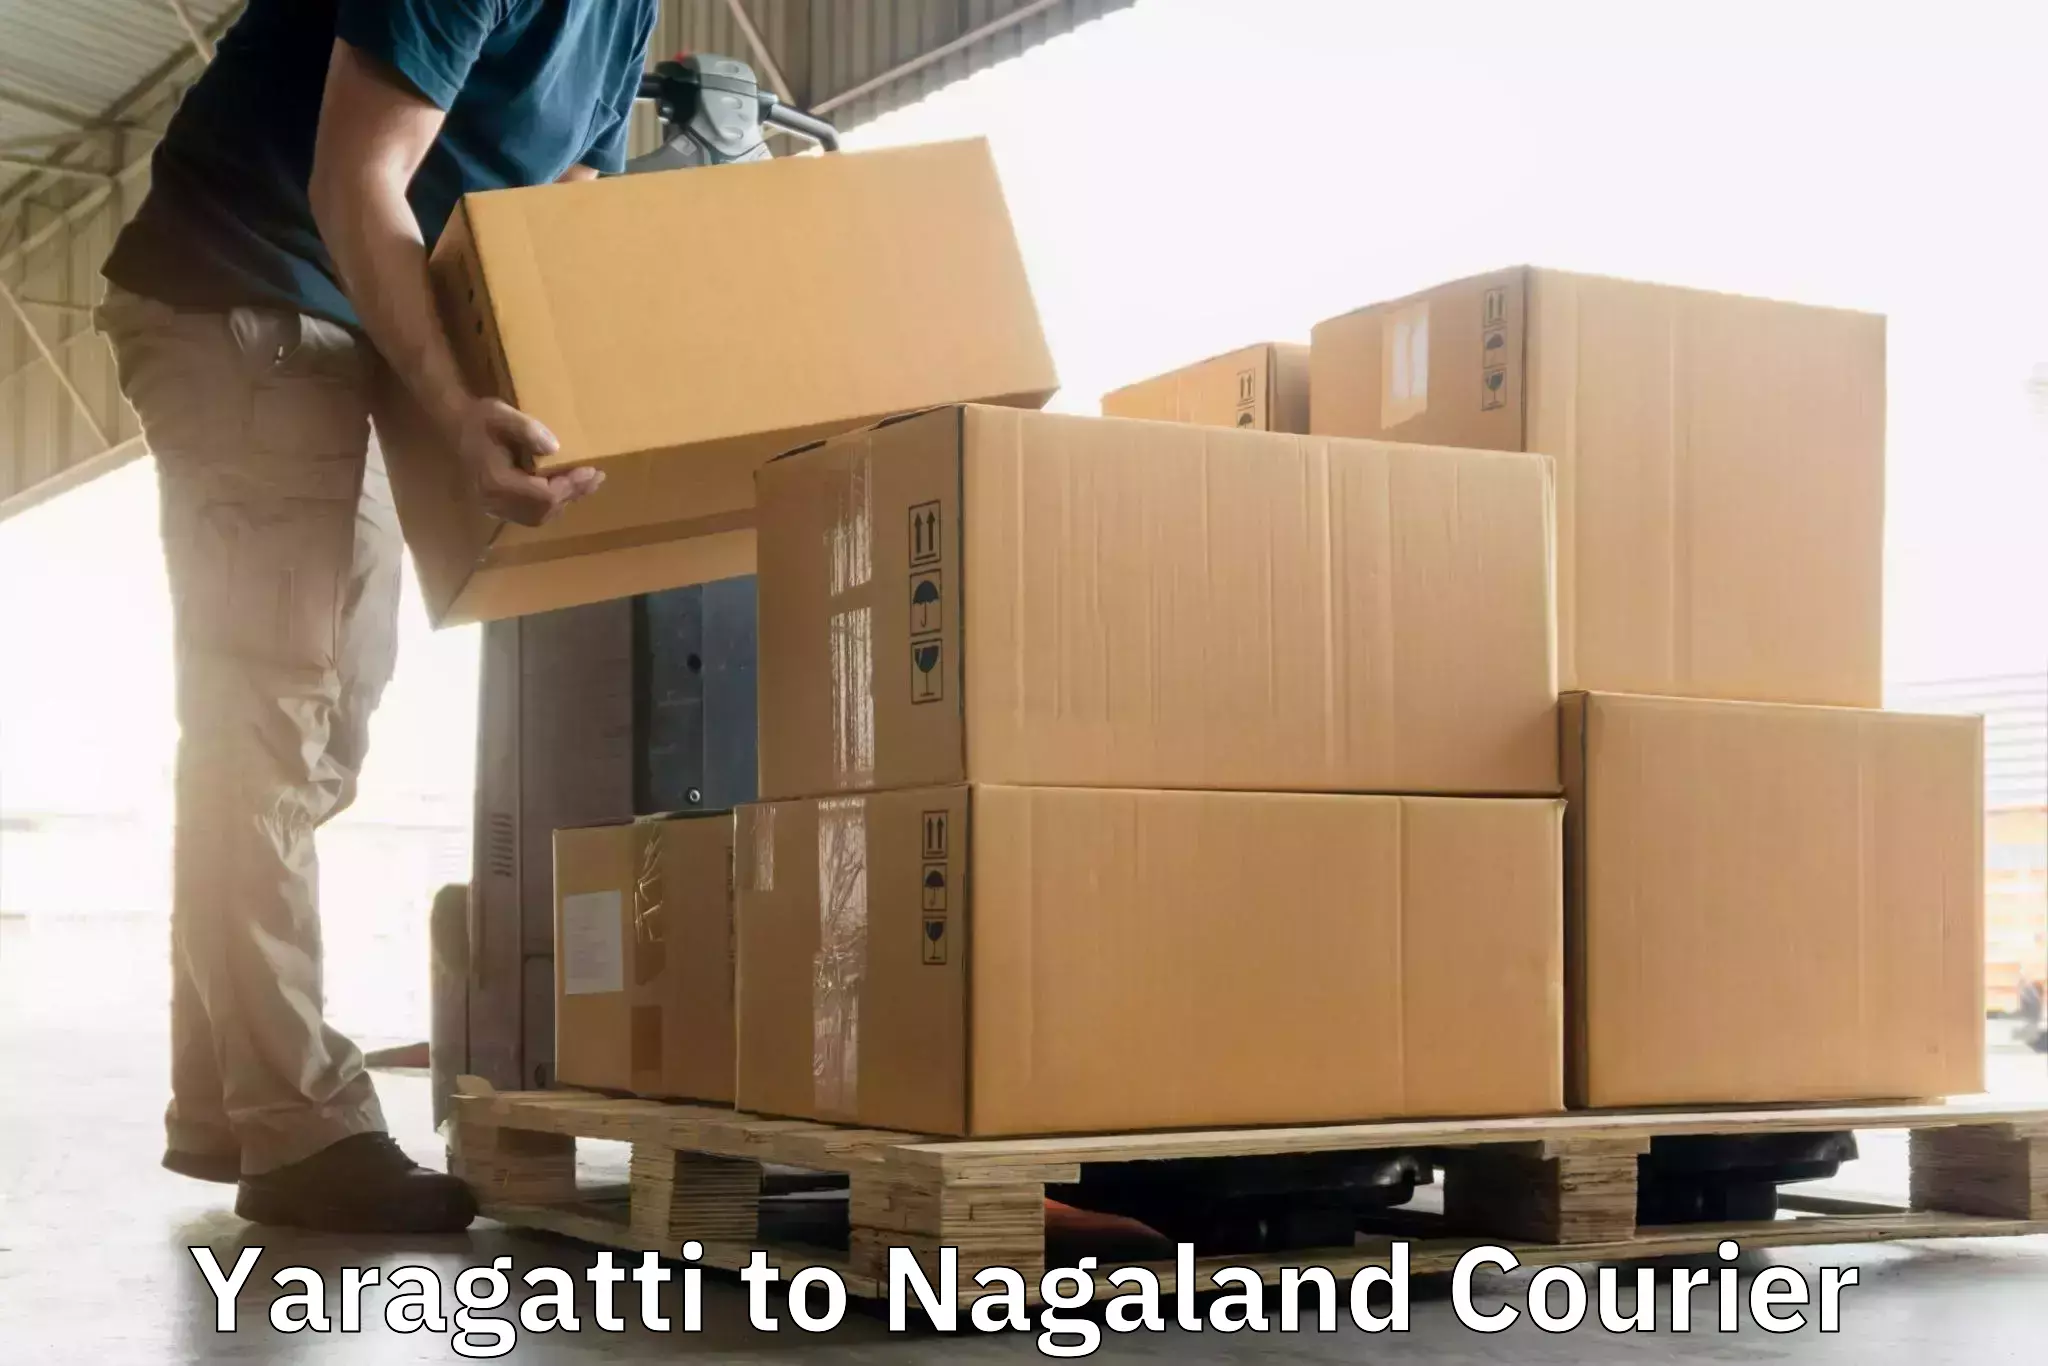 Sustainable delivery practices Yaragatti to Nagaland